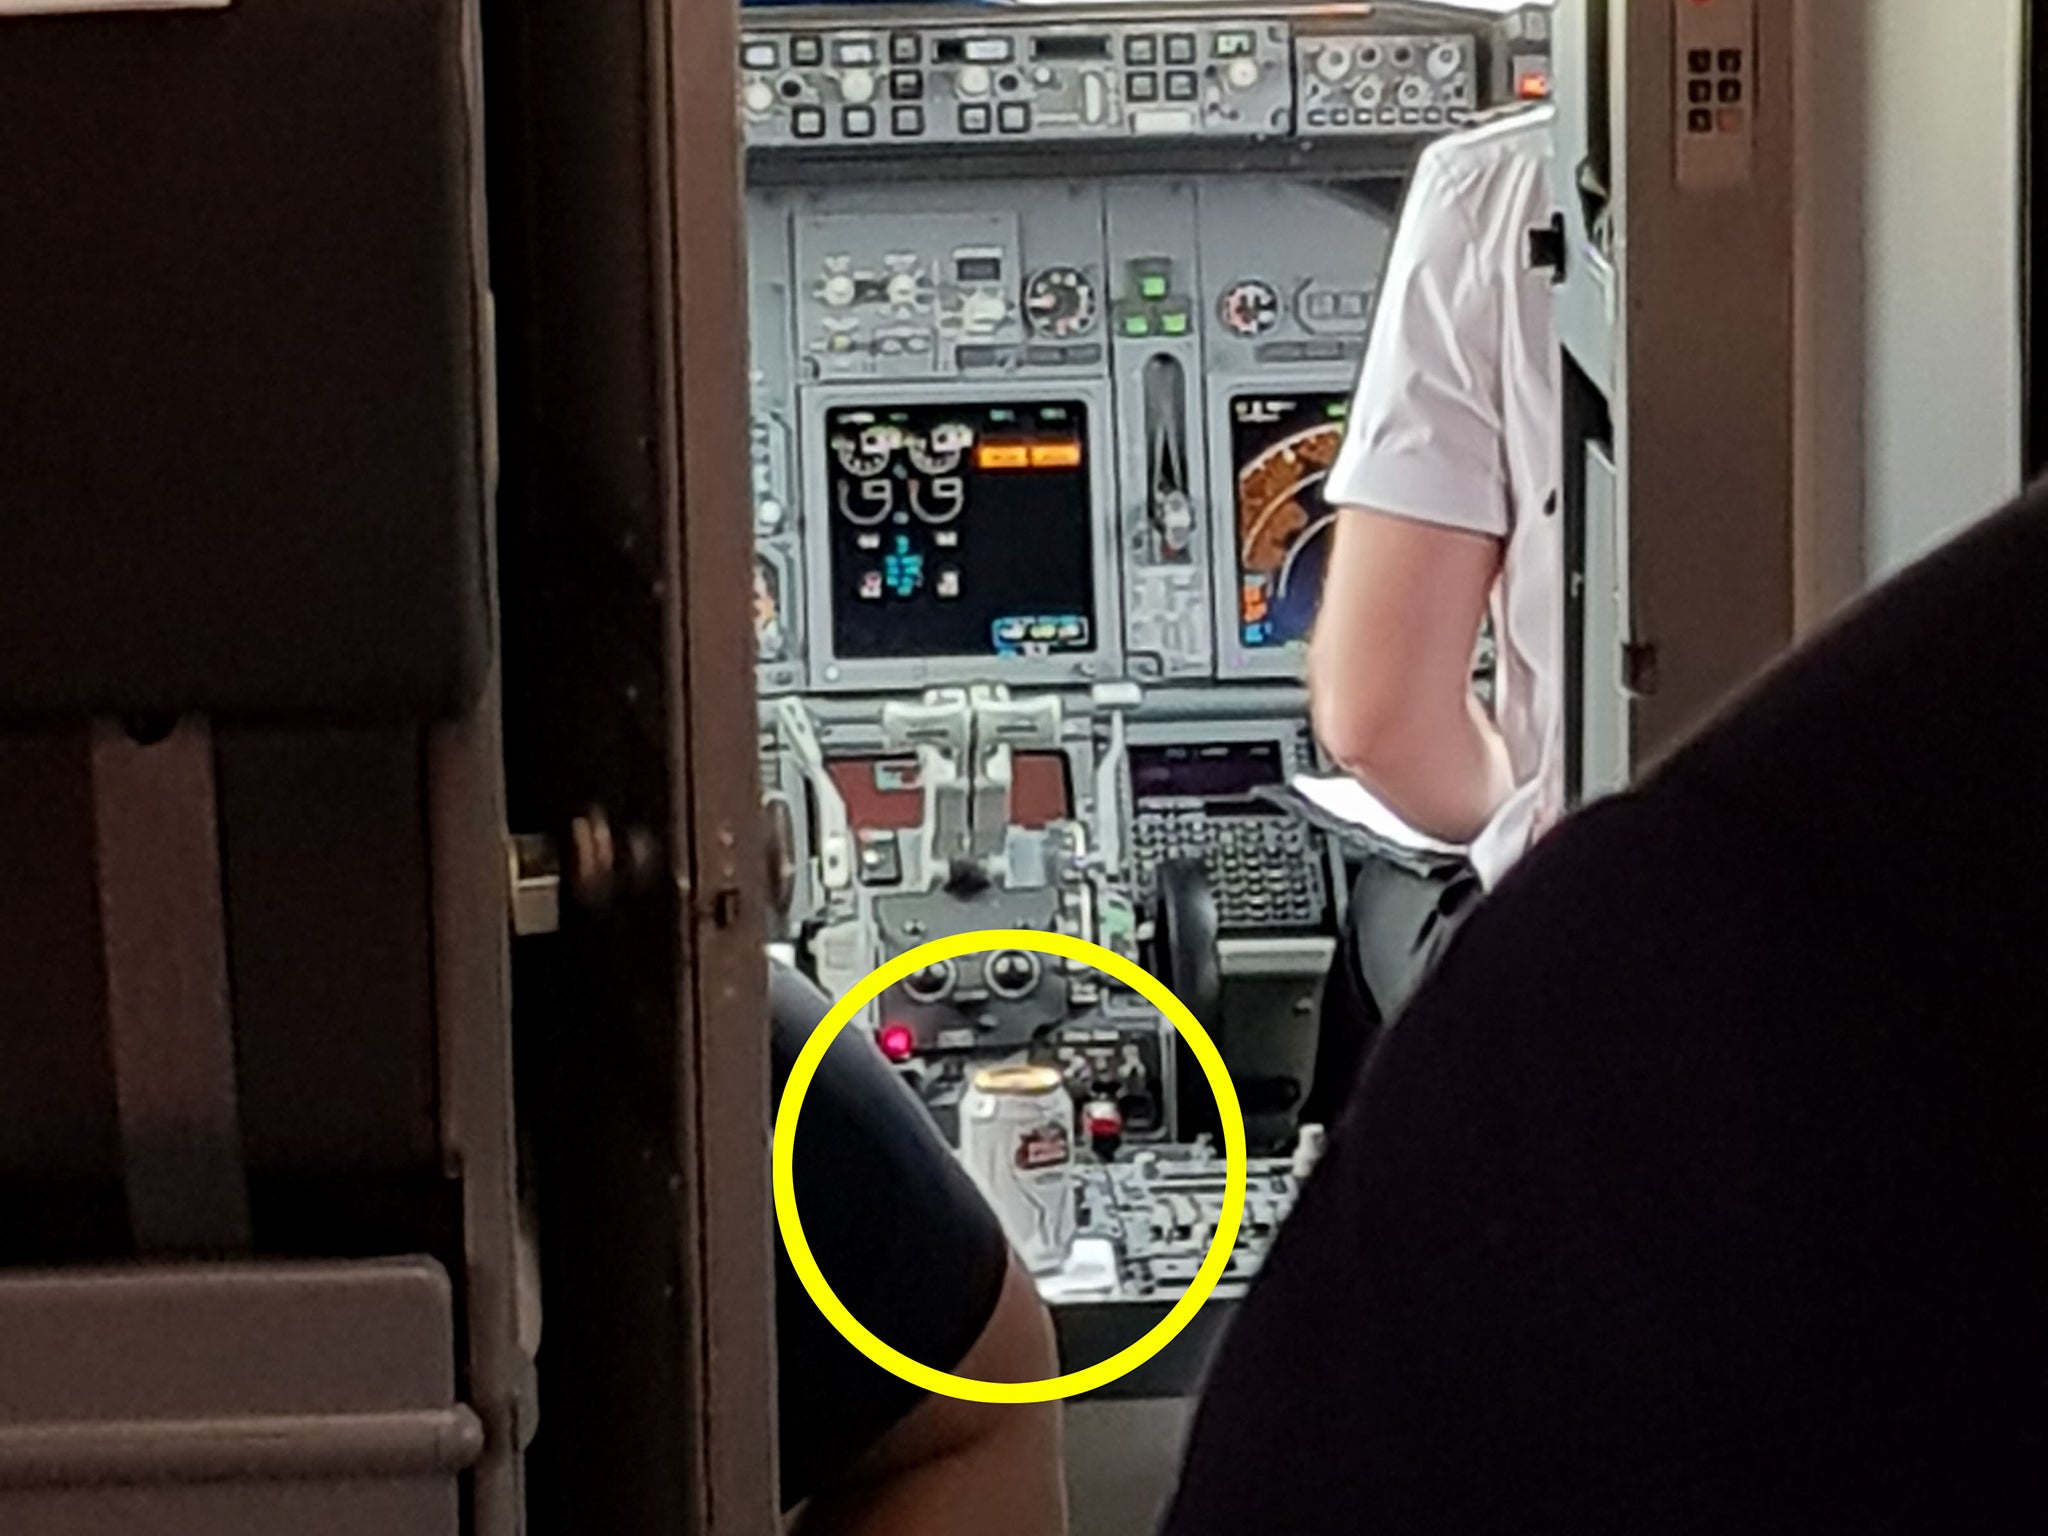 A can of Stella Artois can be seen sitting beside a pilot on the flight from Alicante